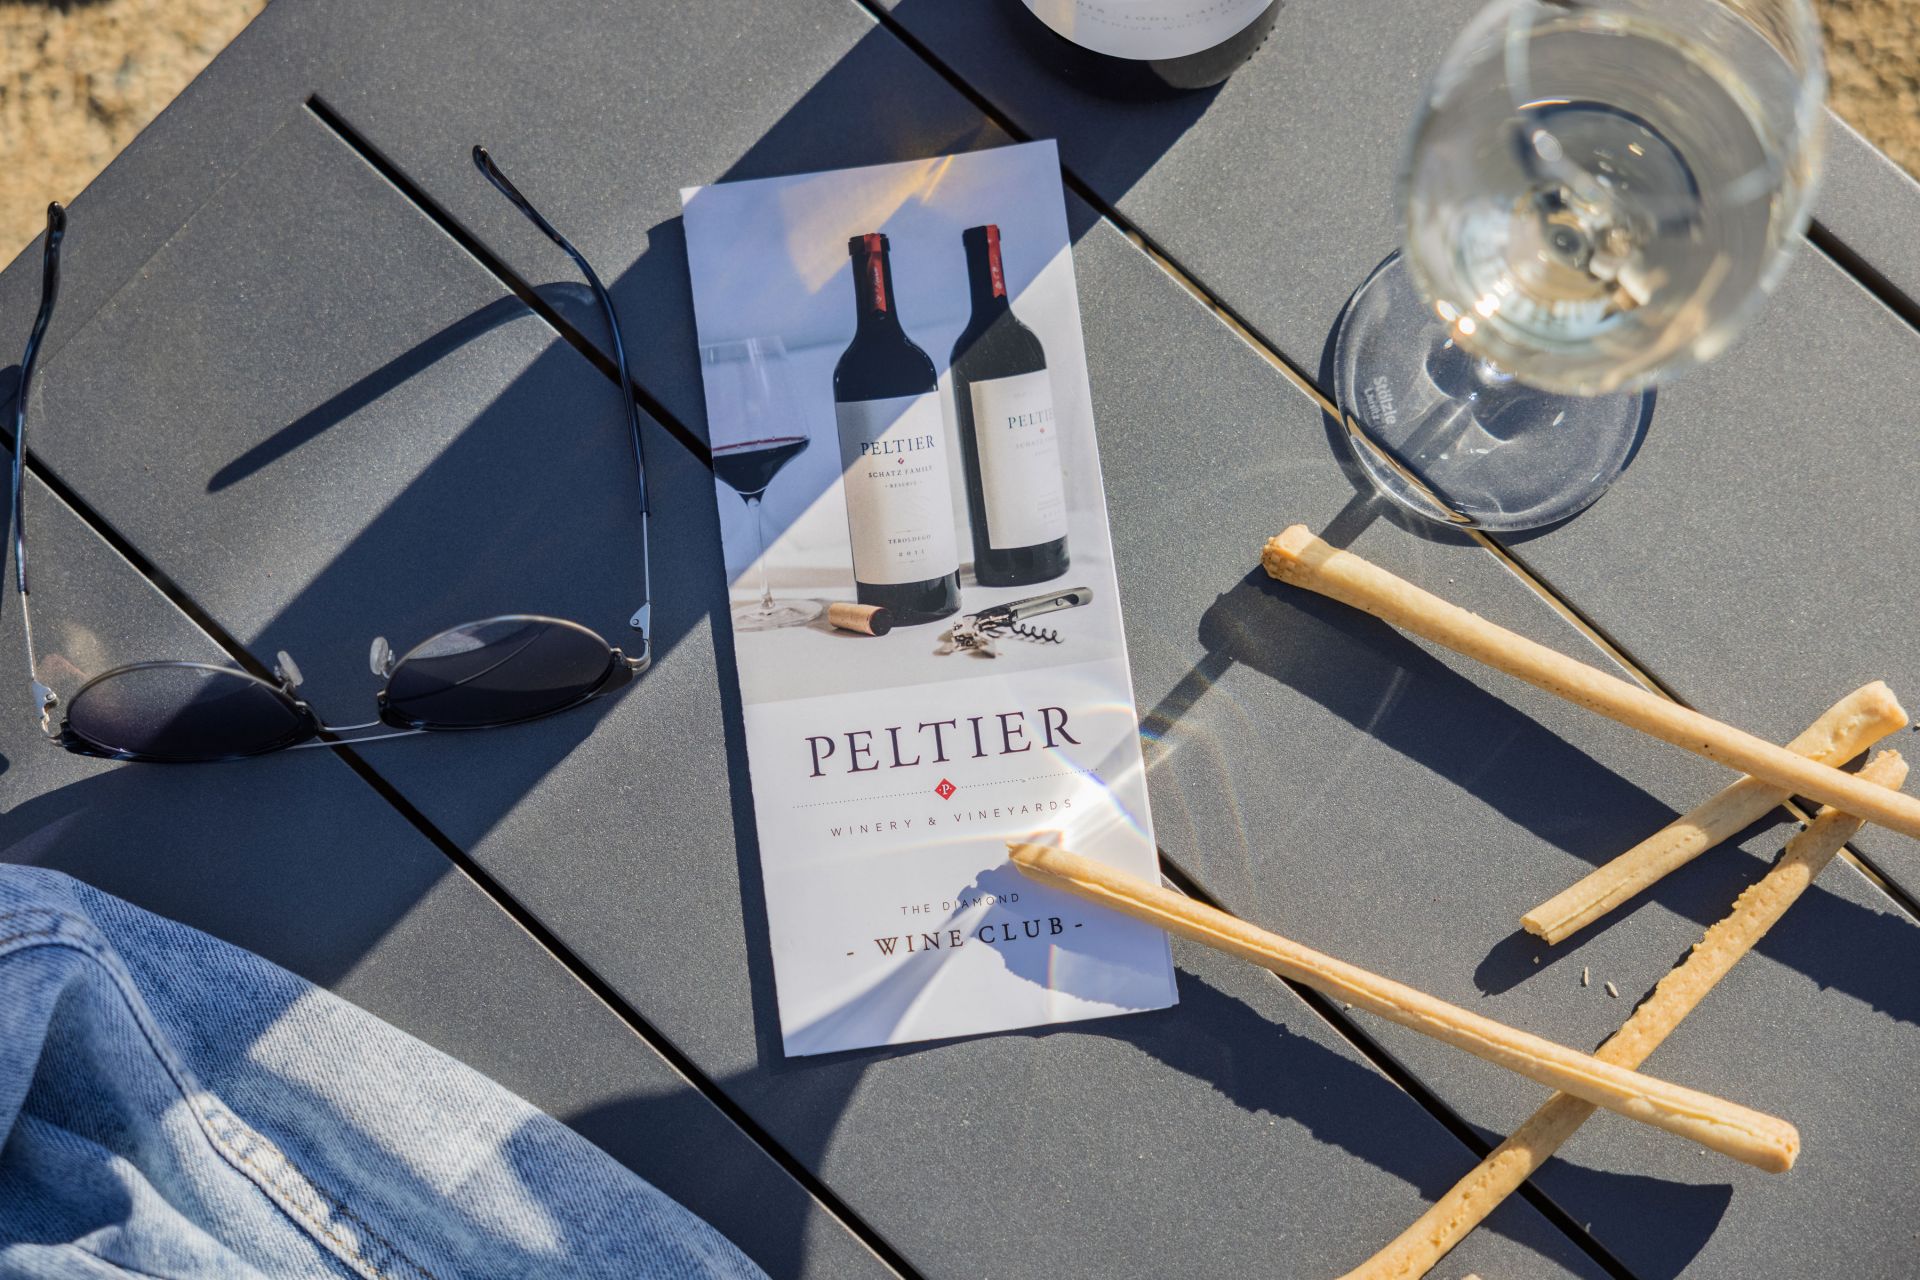 wine club brochure on table with wine breadsticks and sunglasses